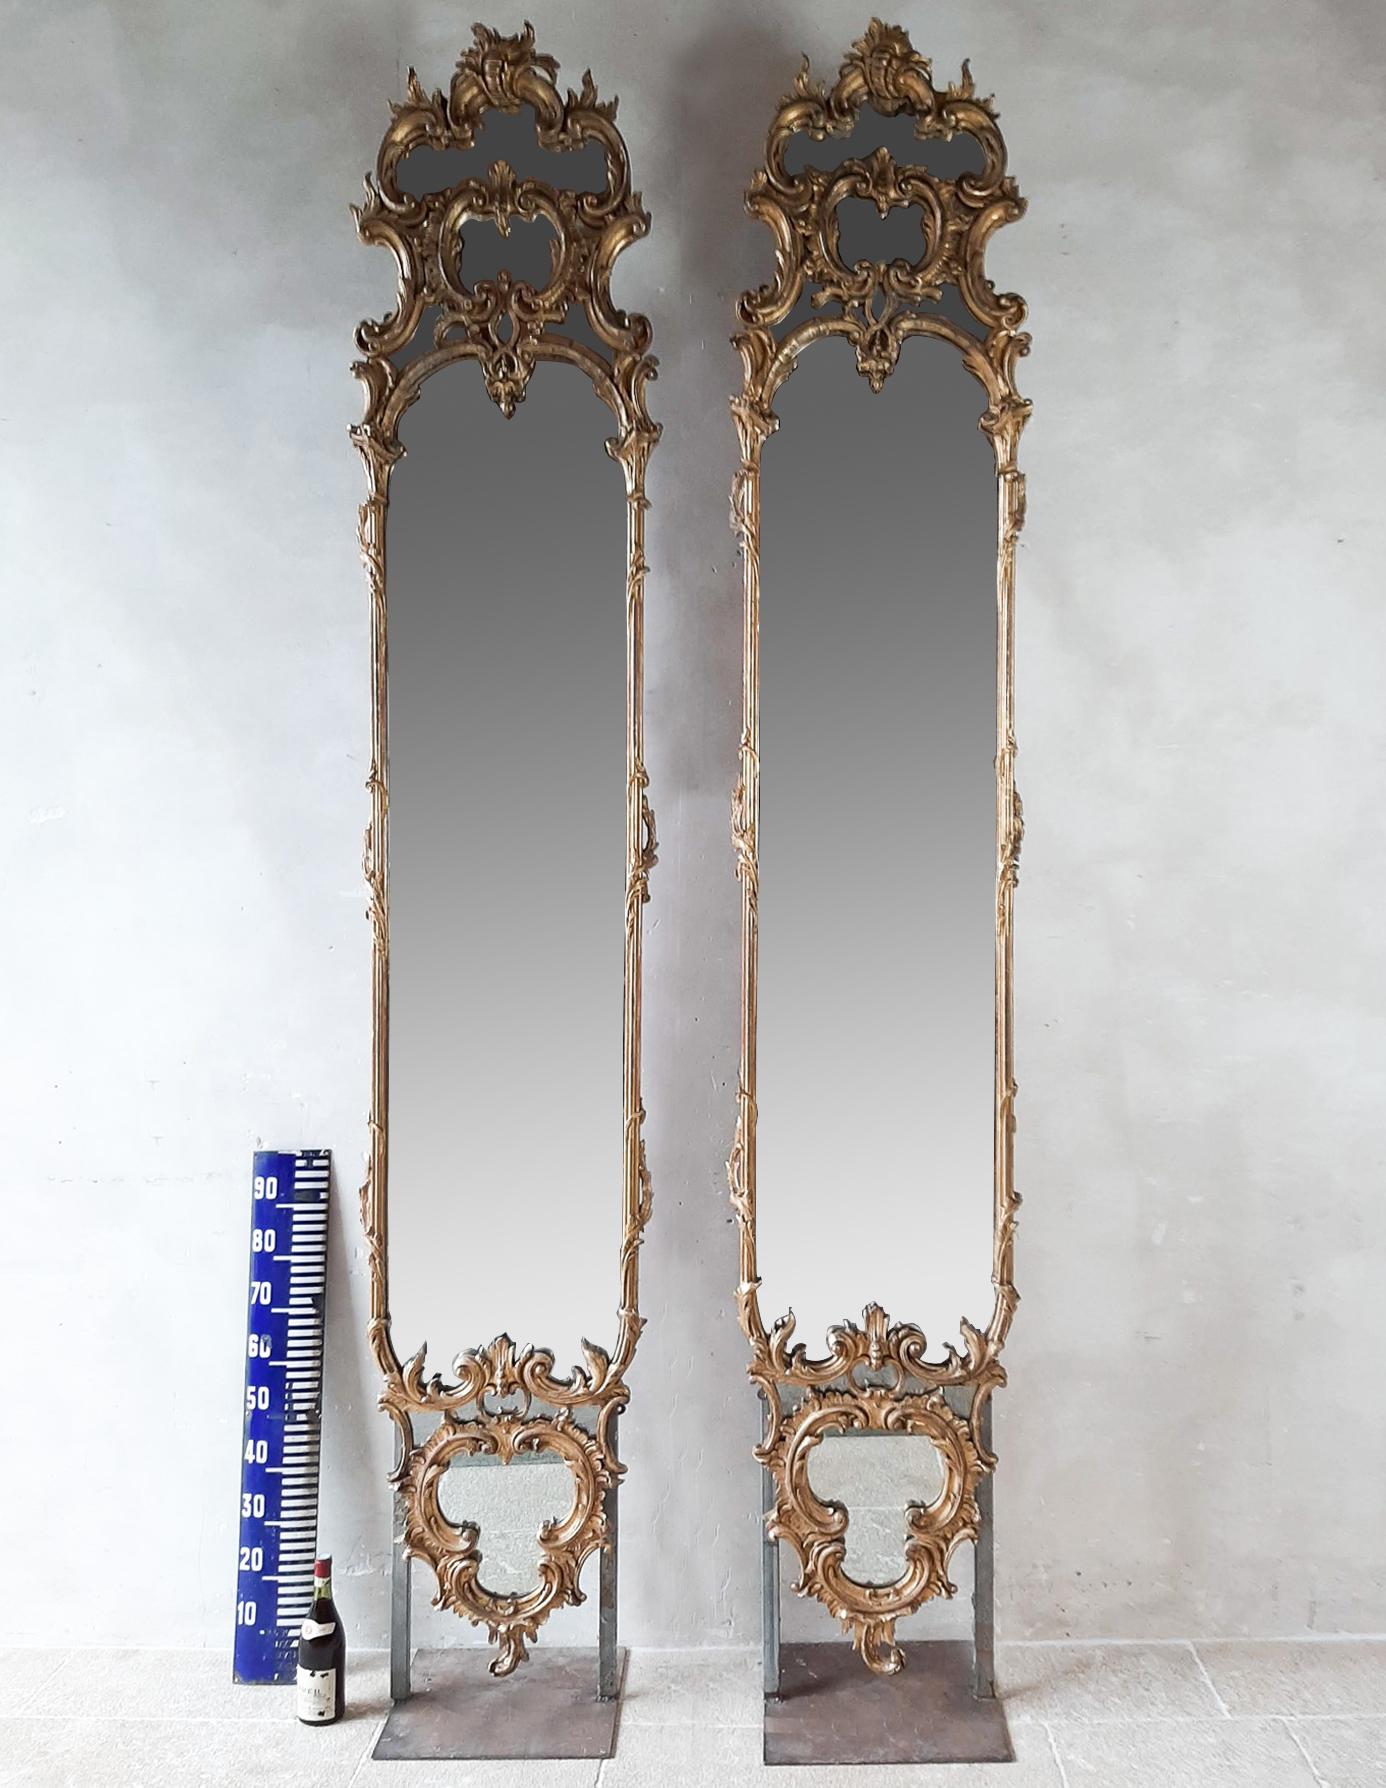 Pair of large antique french pier mirrors. The slim wooden frames are exceptionally rich and finely sculpted with goldleaf gilded gesso. The mirrors are abundantly ornamented. with on the top and bottom C-scrolls and leafs, and acanthus leafs around